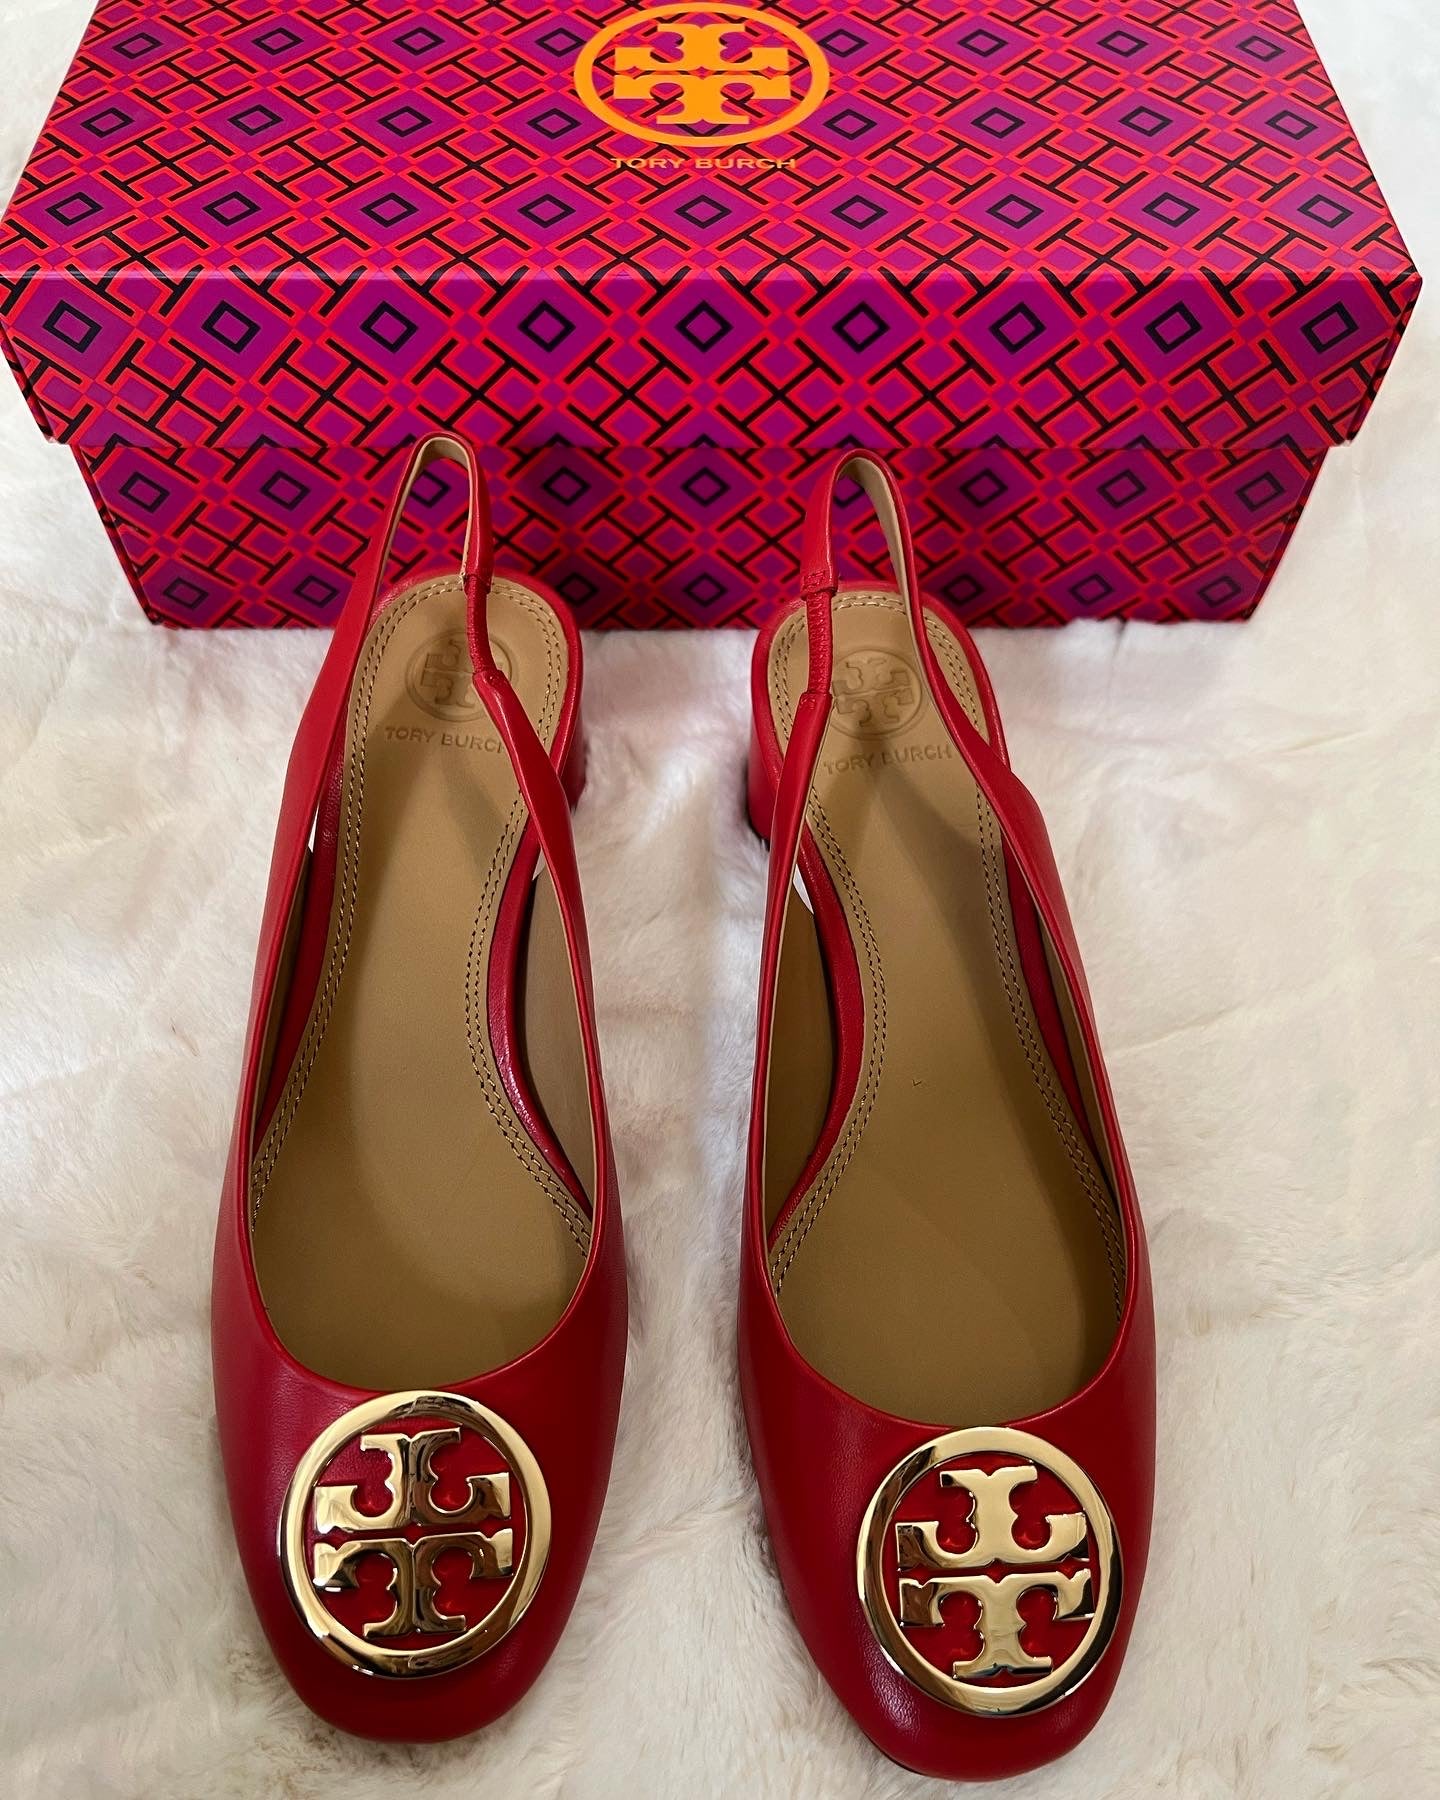 Tory Burch Benton Leather Slingback Pumps, Brilliant Red, Size 6.5M